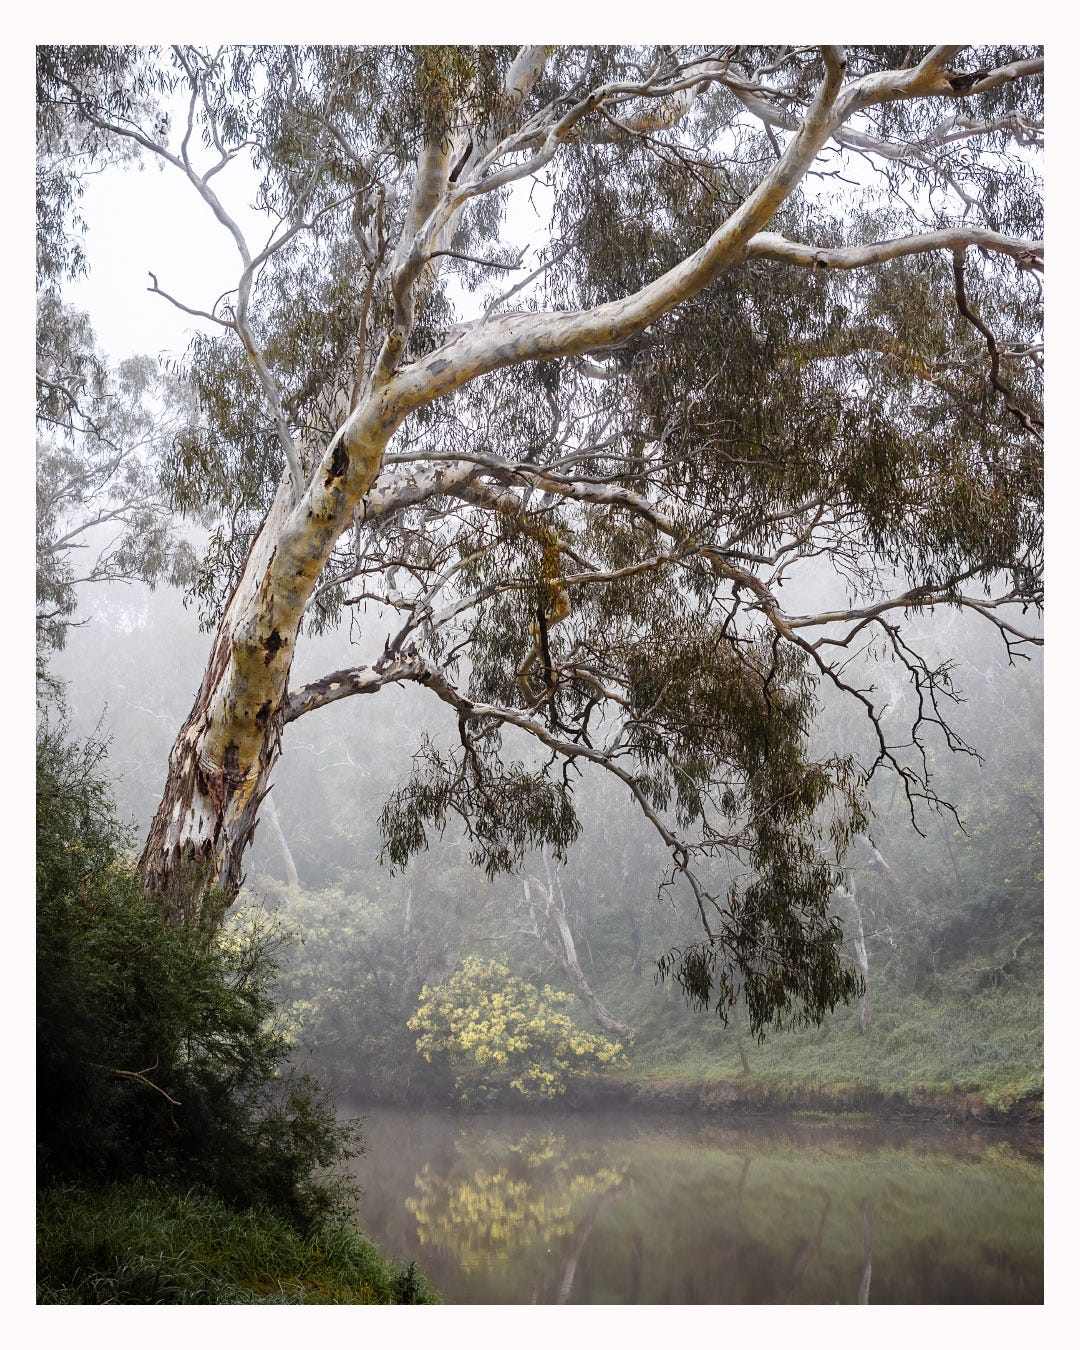 A eucalpytus tree or gum tree next to Yarra River leaning over water on foggy morning with wattle tree in bloom on far bank